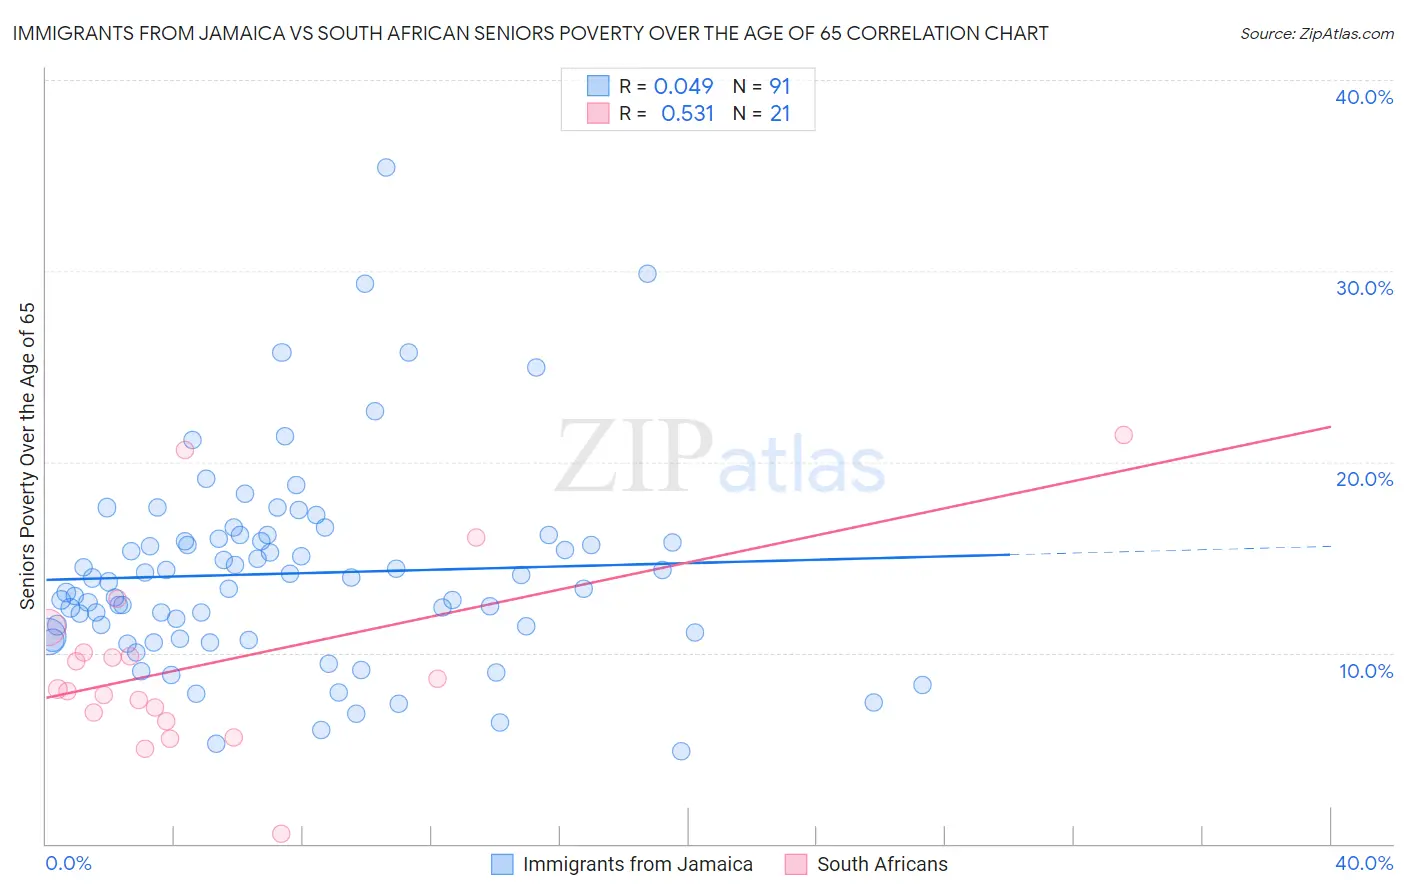 Immigrants from Jamaica vs South African Seniors Poverty Over the Age of 65